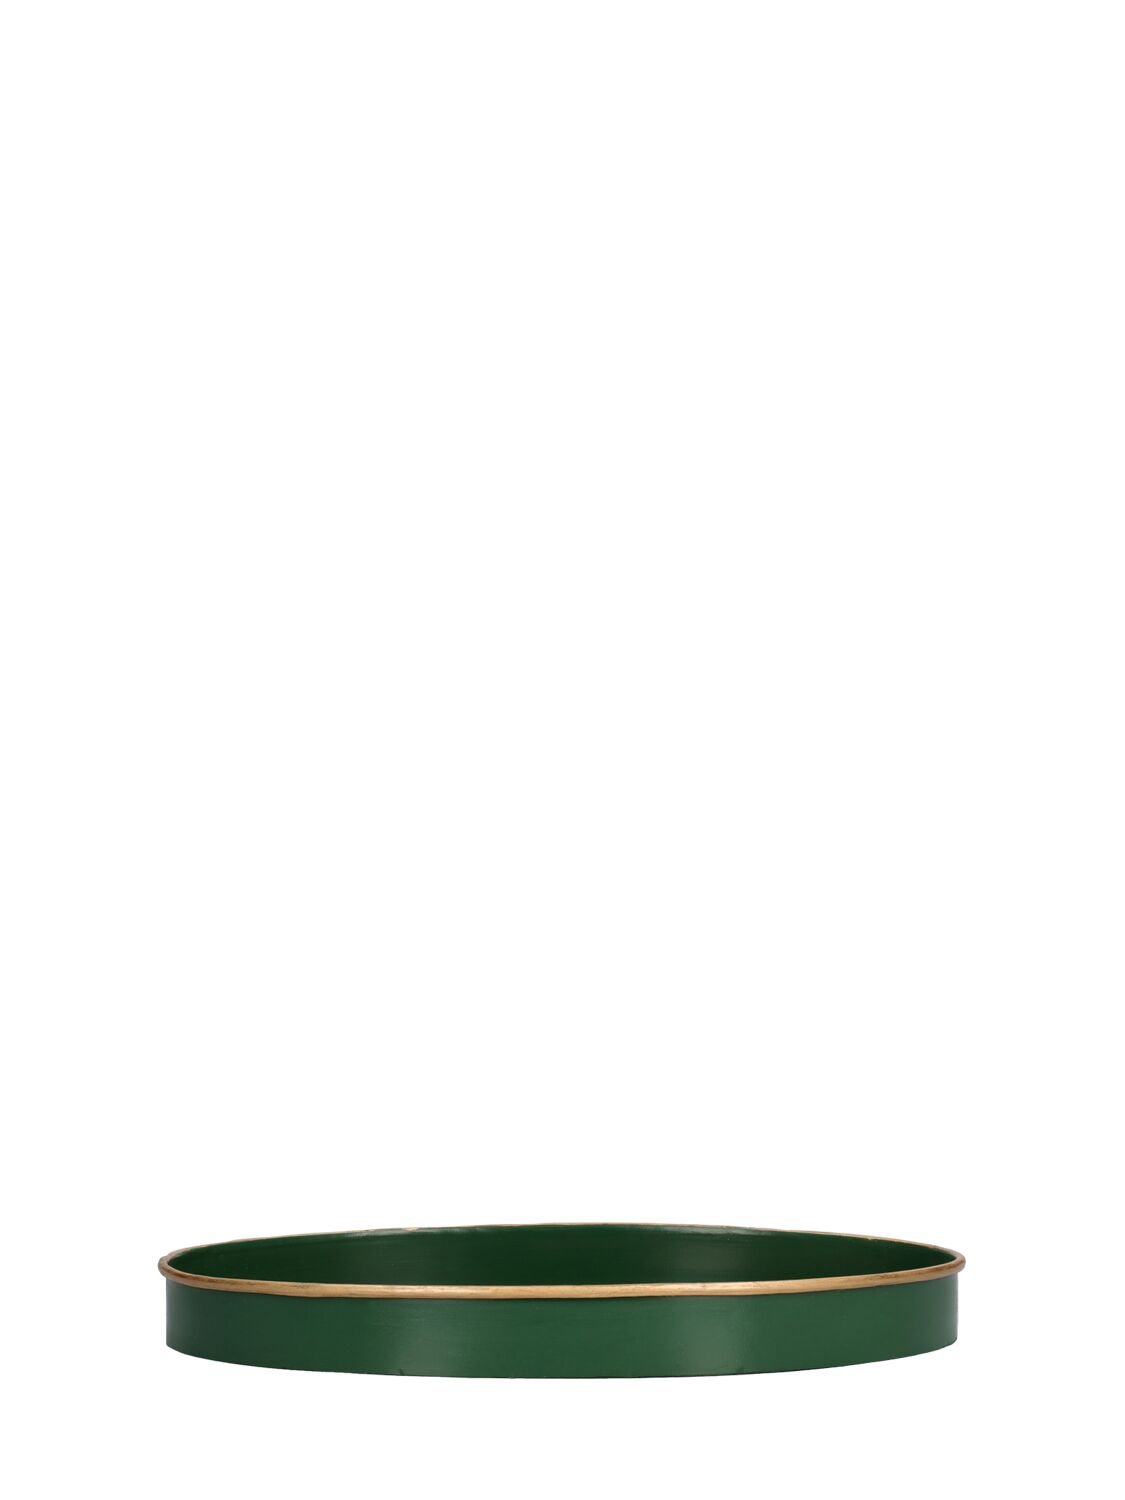 Shop Les Ottomans Handpainted Iron Tray In Green